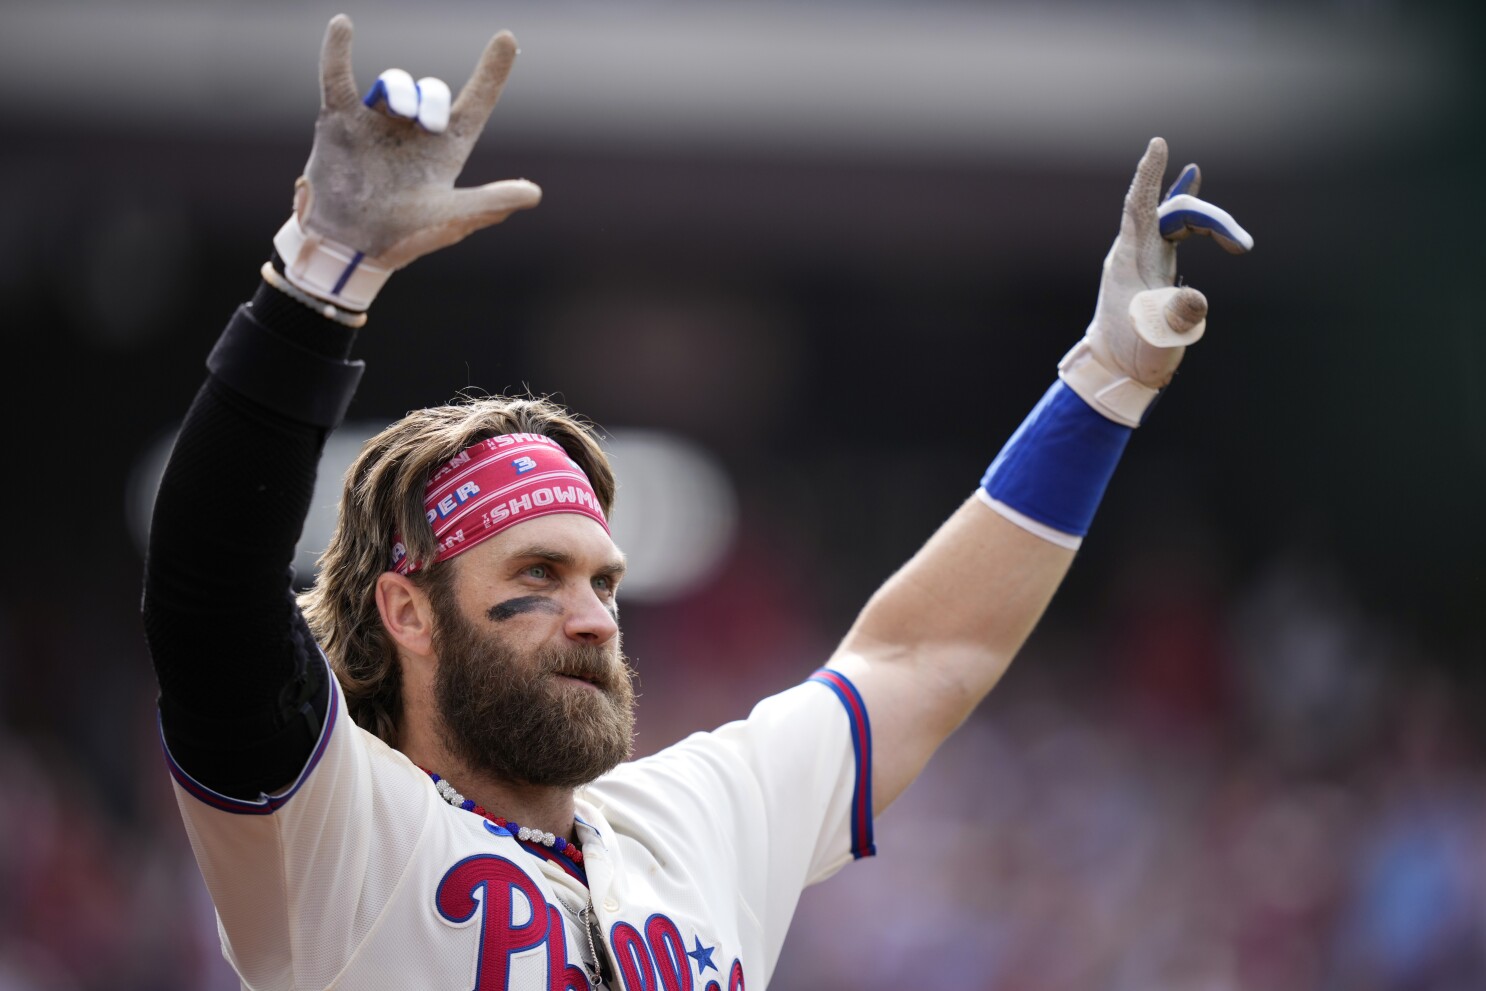 Washington Nationals 6-0 over Kansas City Royals on Expos Day in